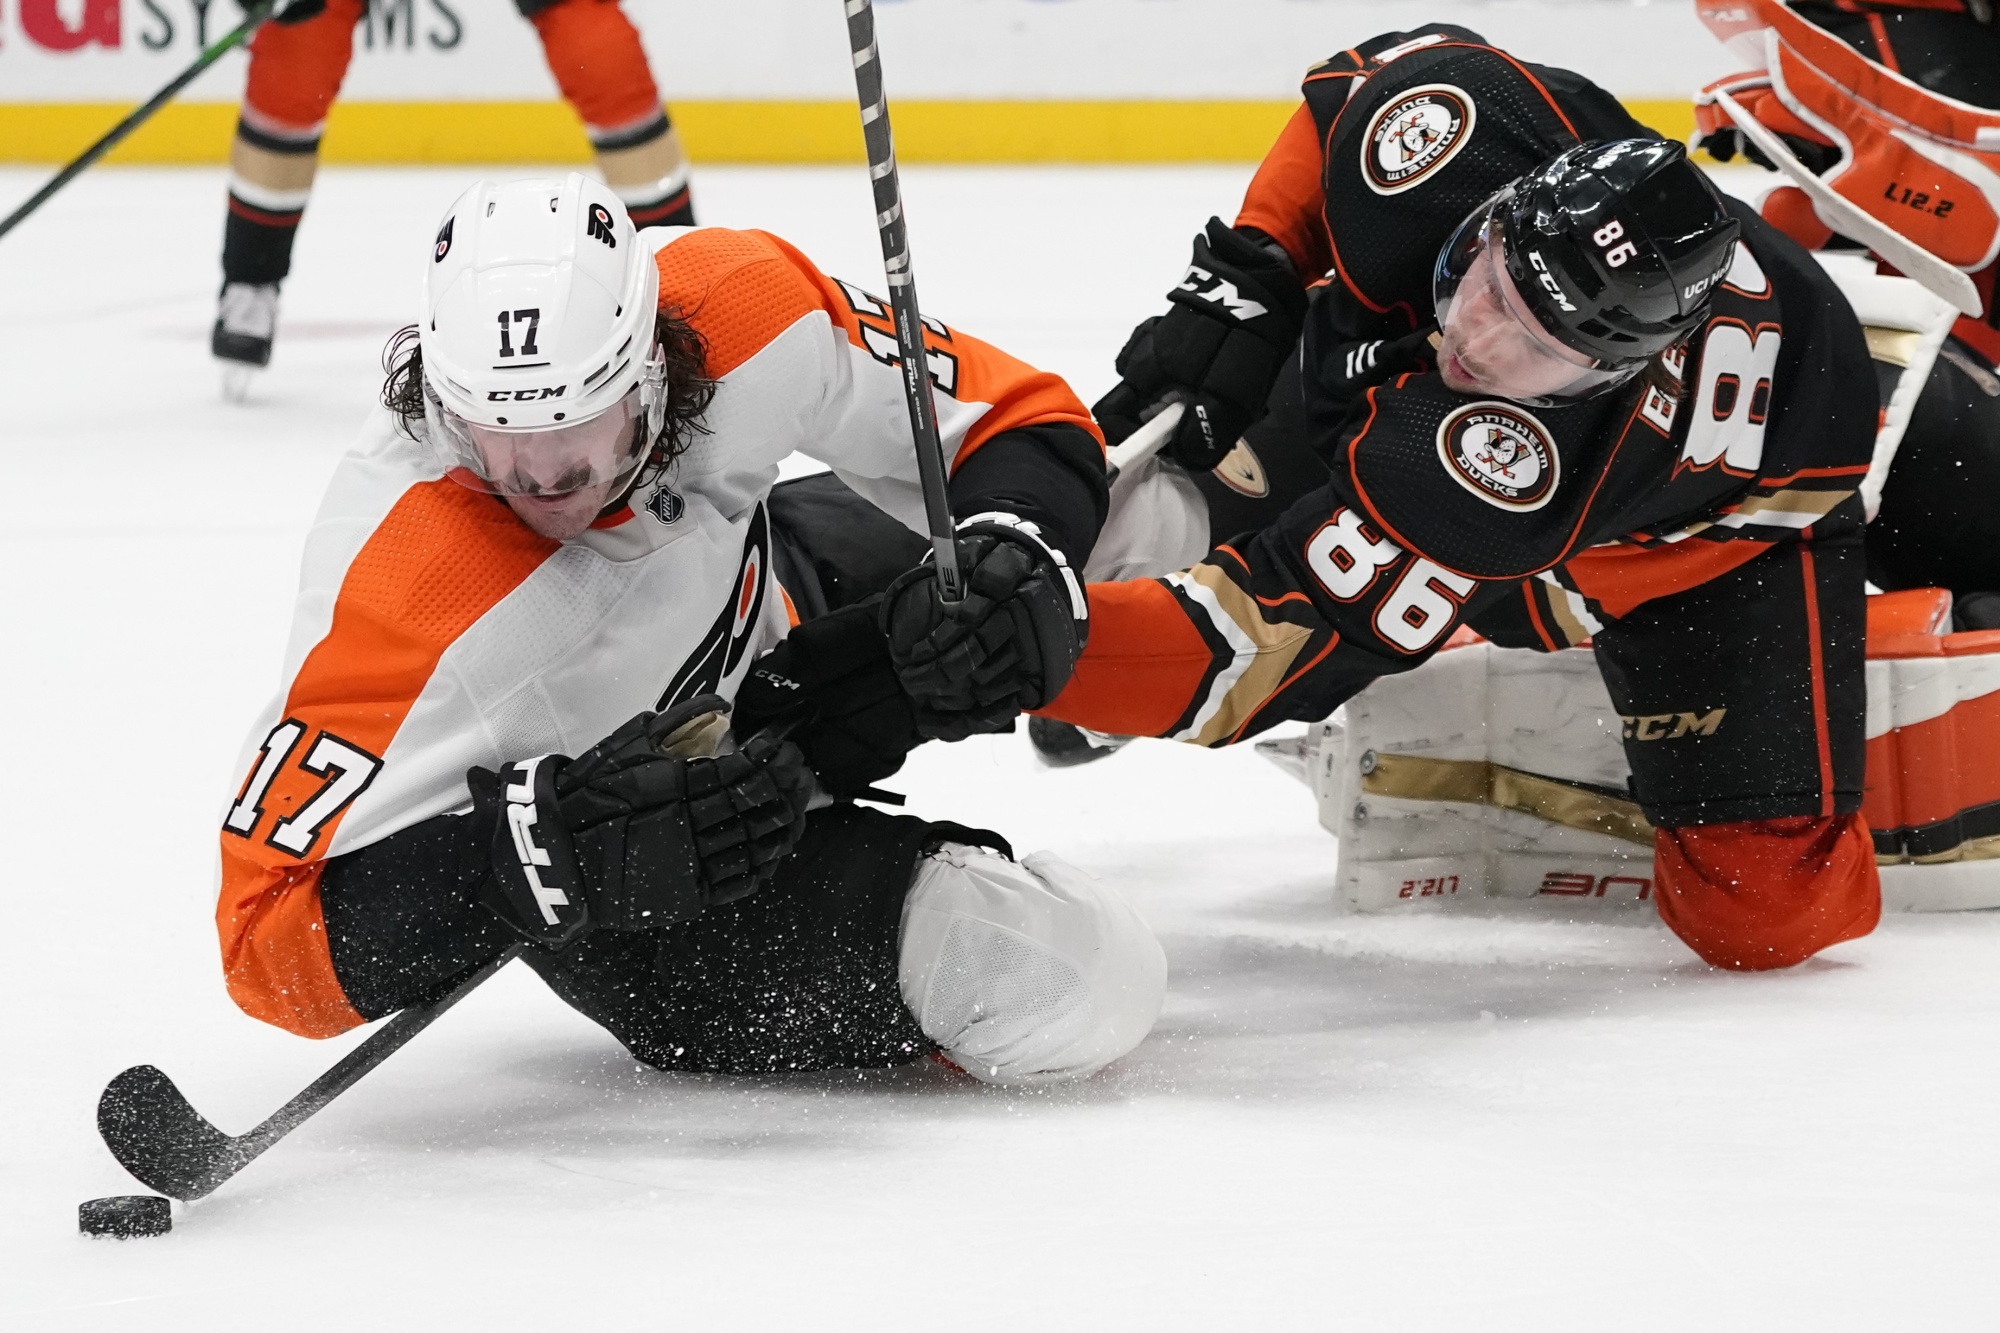 Los Angeles Kings @ Anaheim Ducks: Game Preview & Discussion